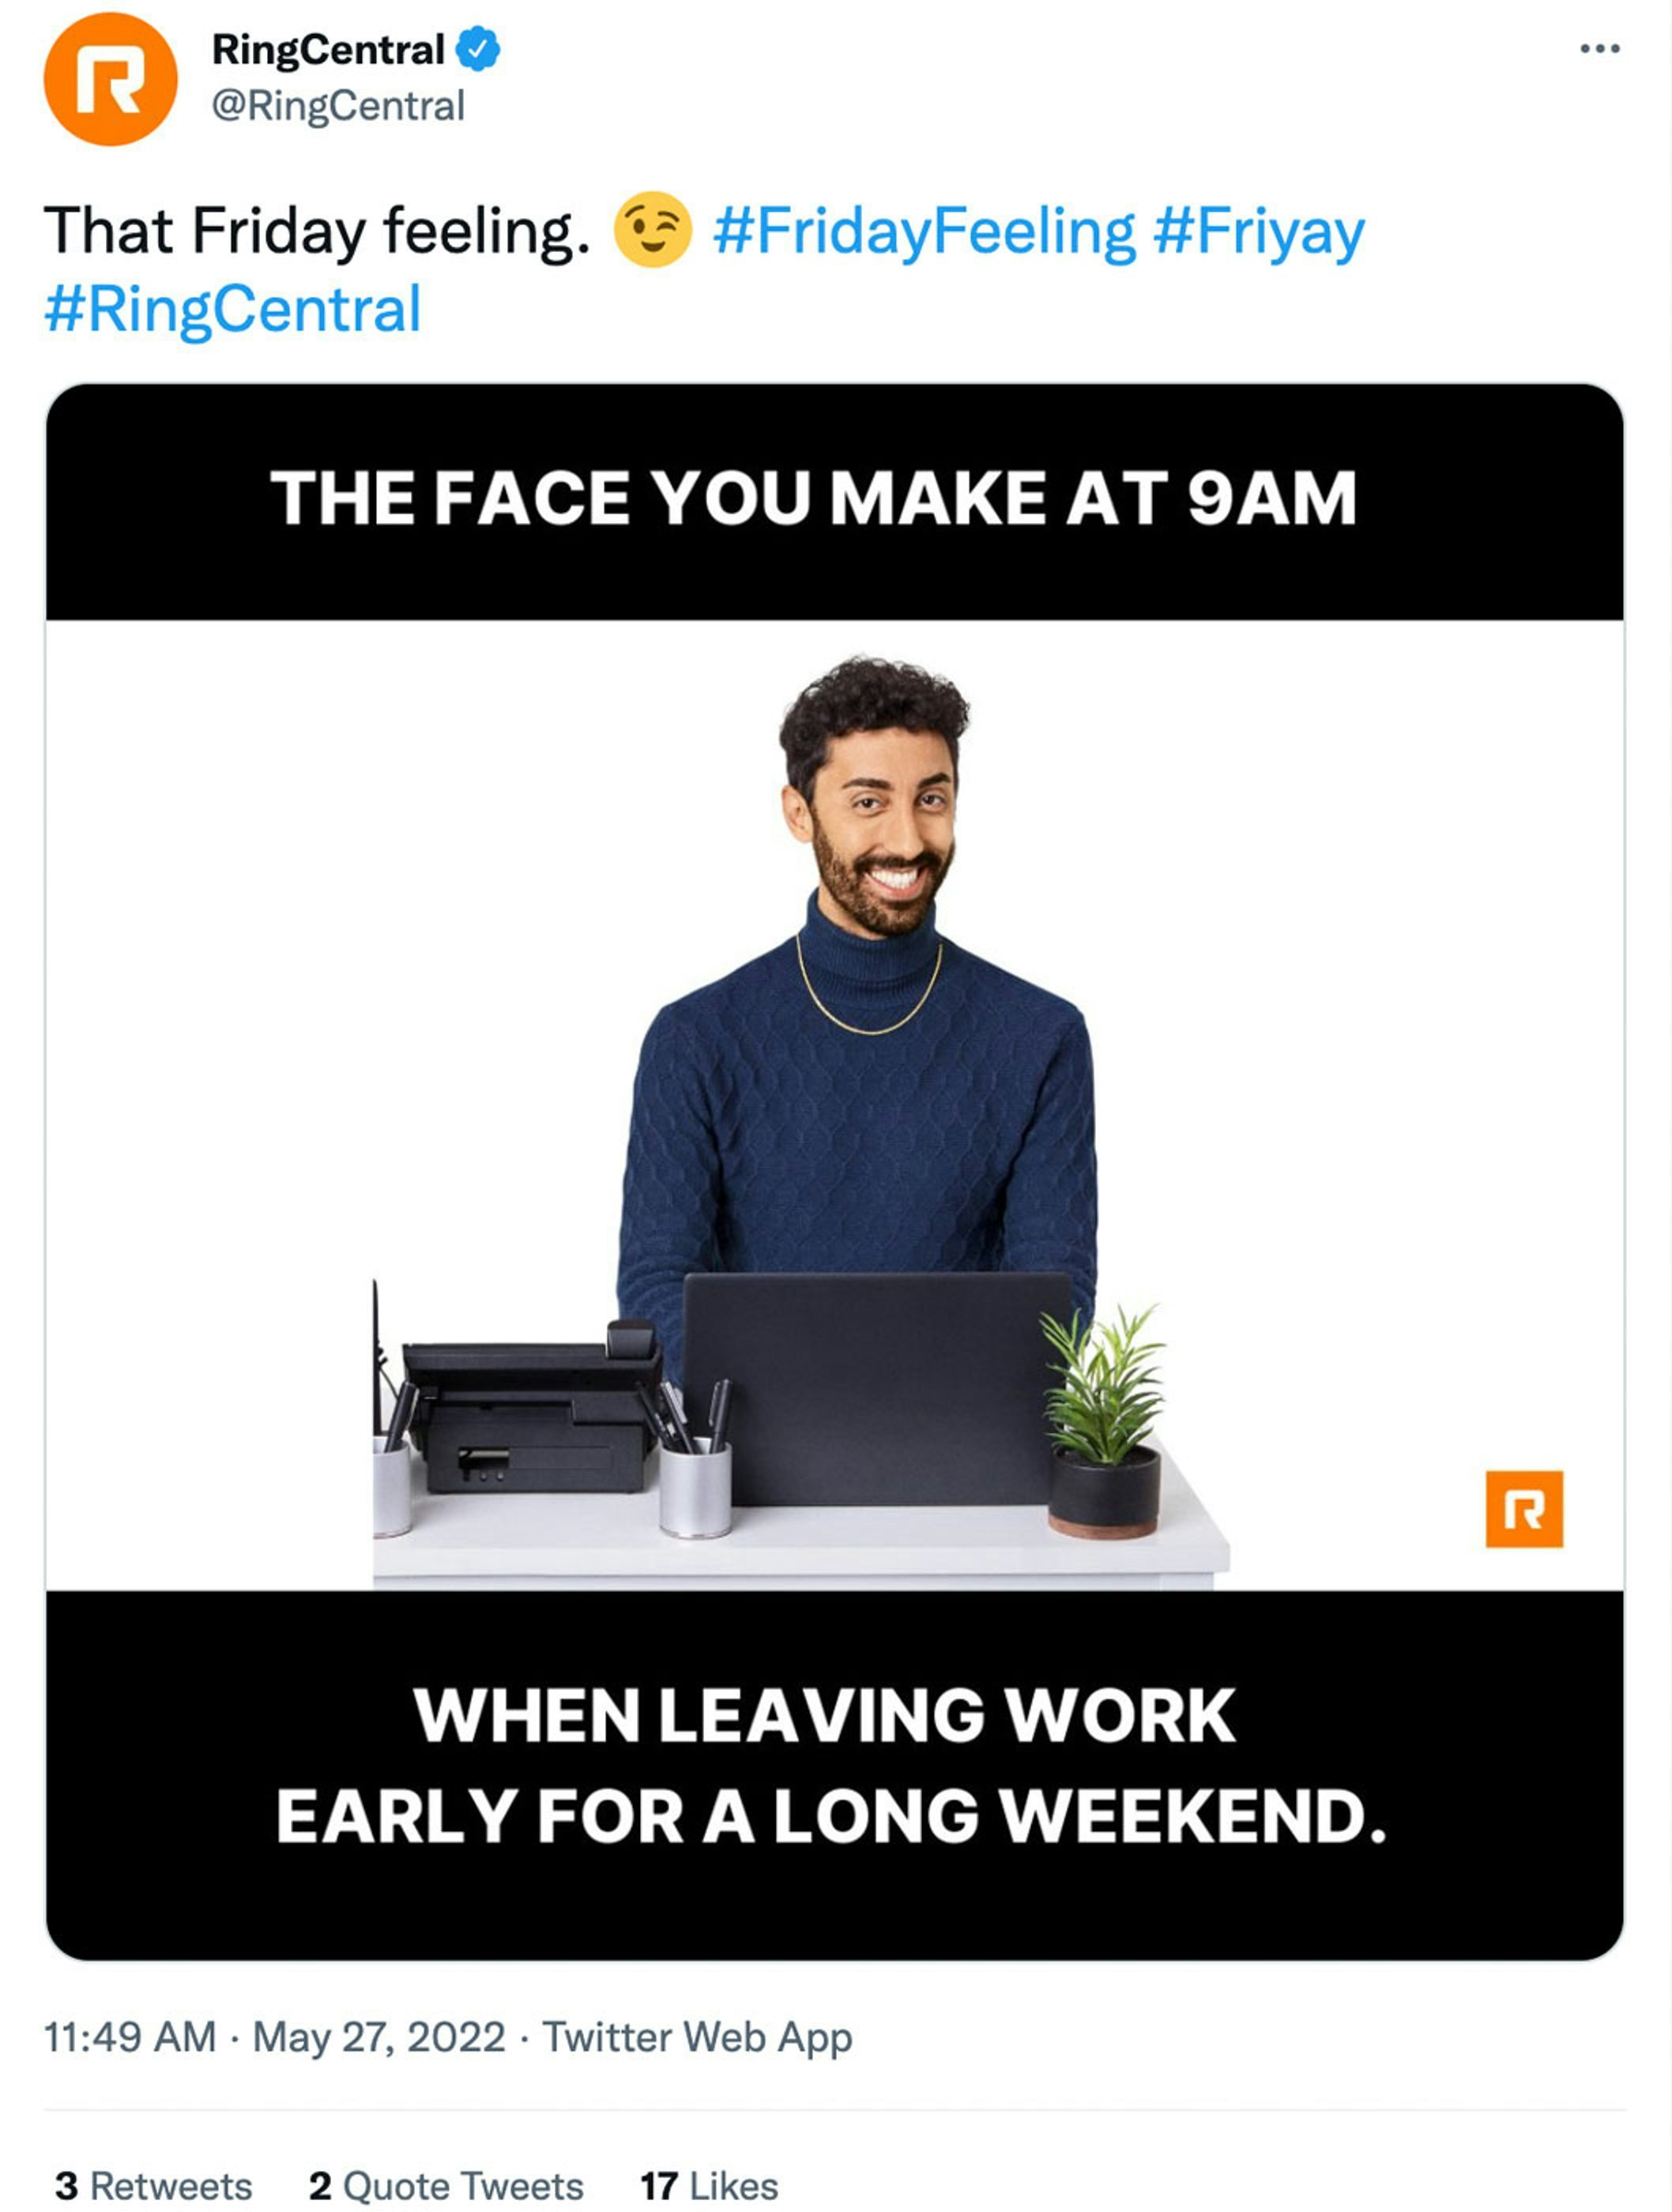 A man smiling above text "The face you make at 9AM when leaving work early for a long weekend." #FridayFeeling Tweet by RingCentral.